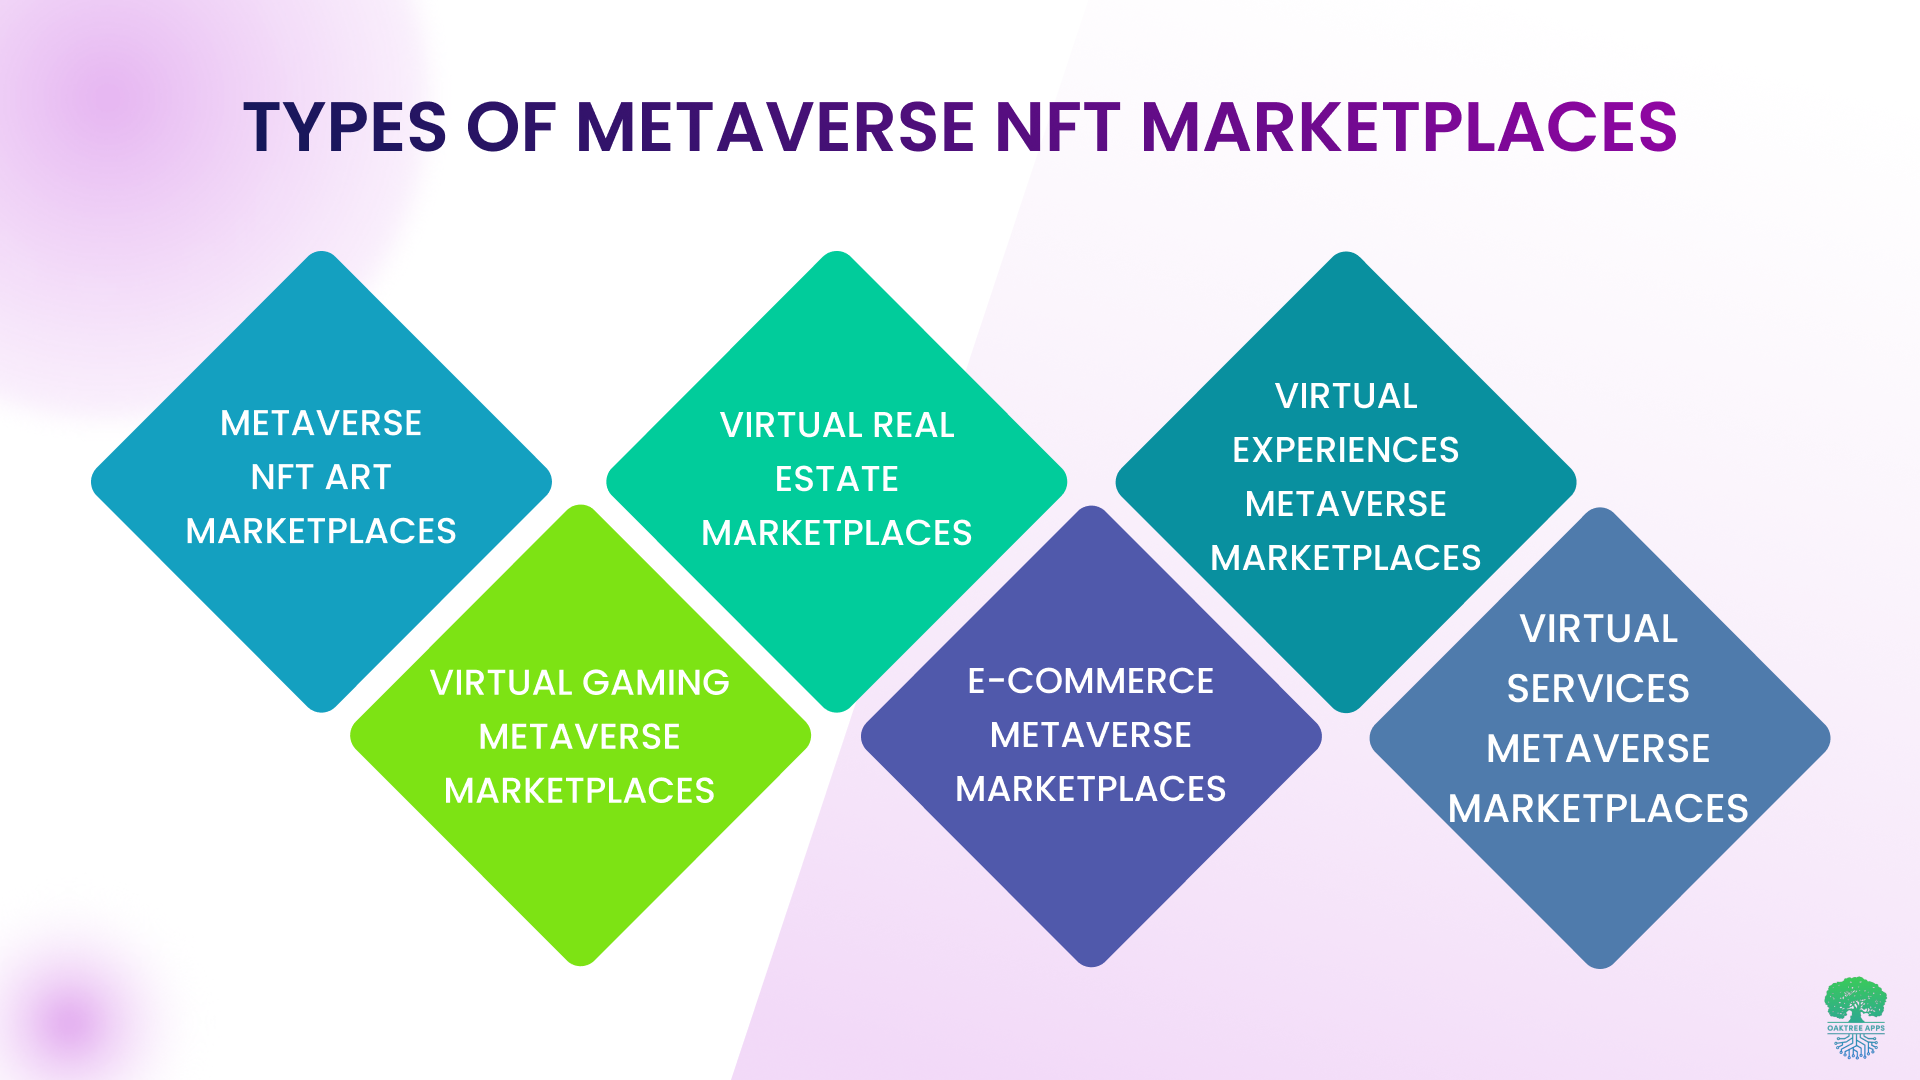 Types_of_metaverse_NFT_marketplaces.png